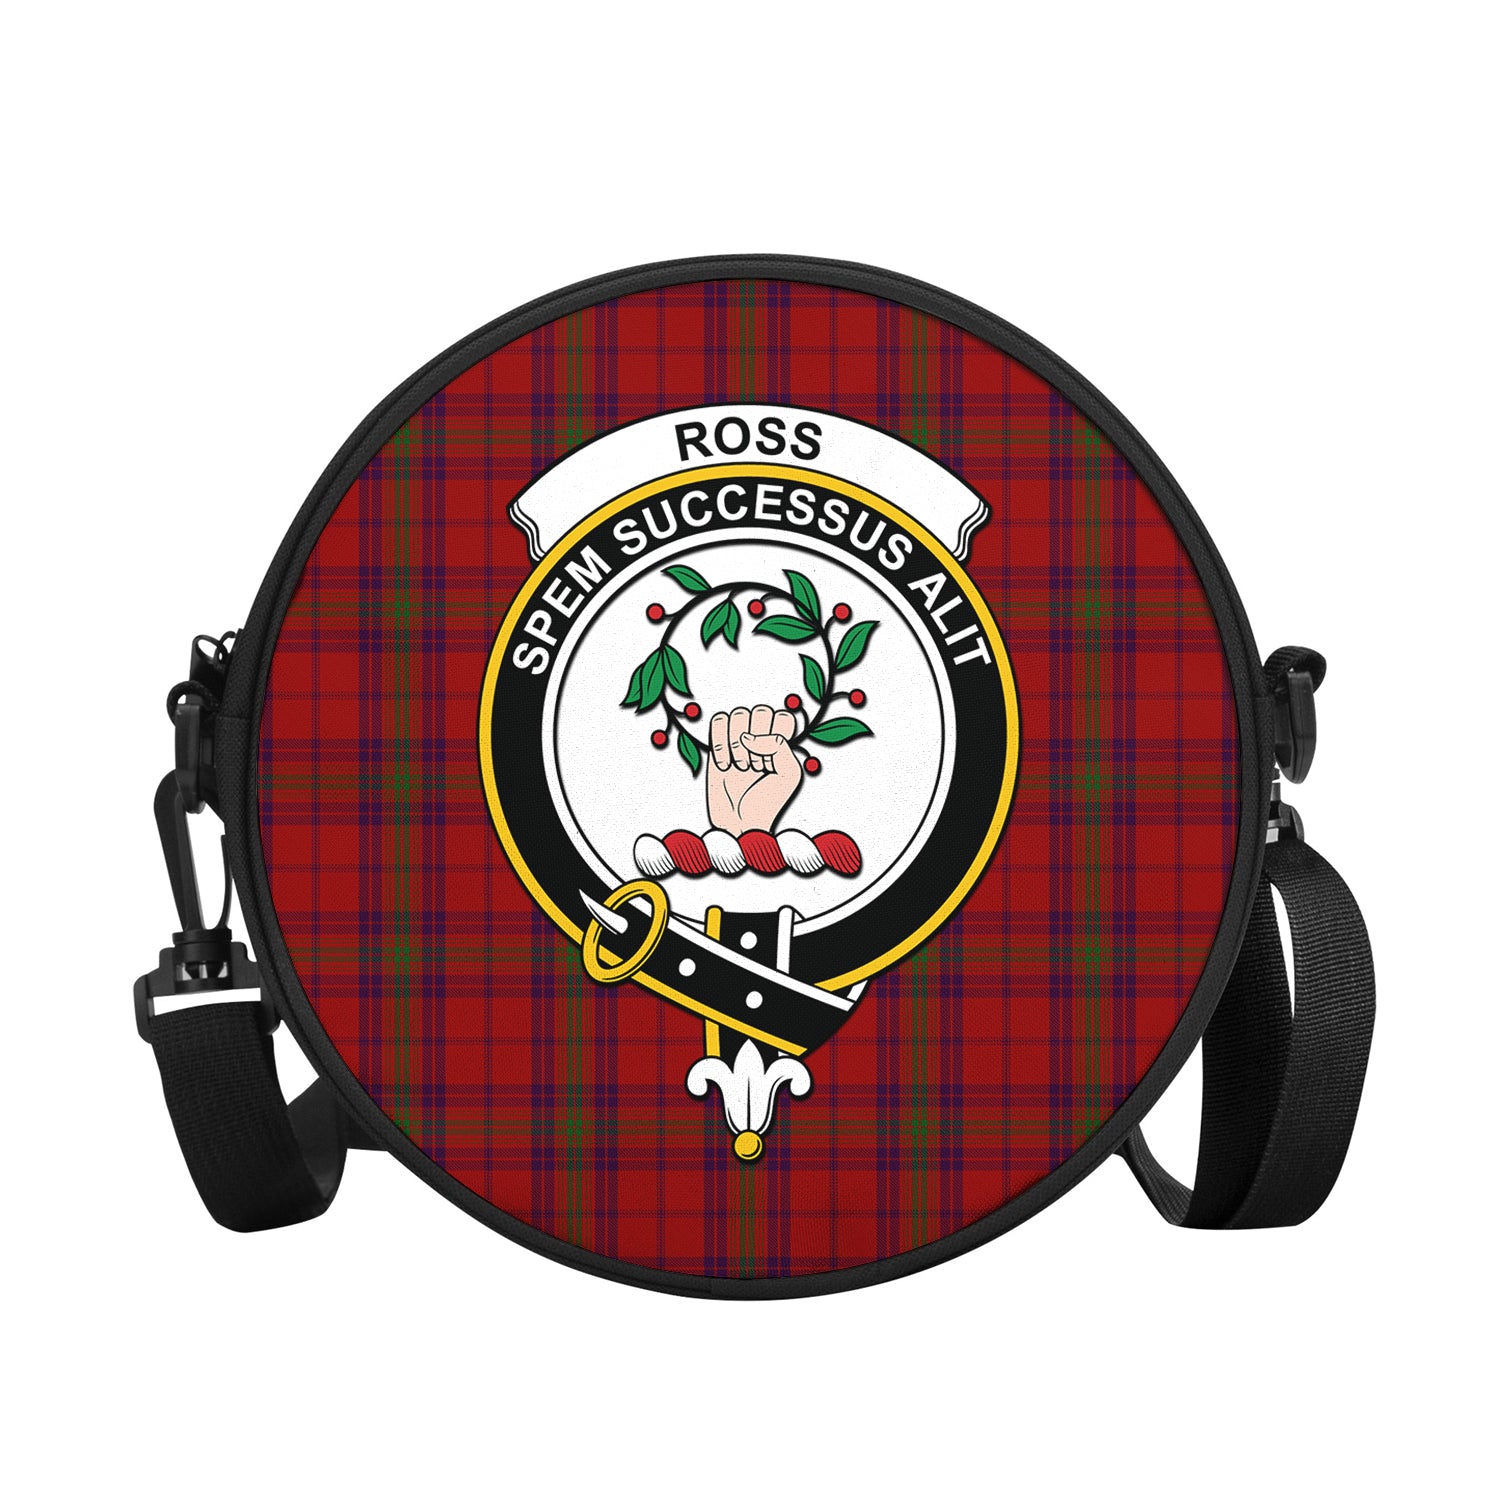 ross-old-tartan-round-satchel-bags-with-family-crest